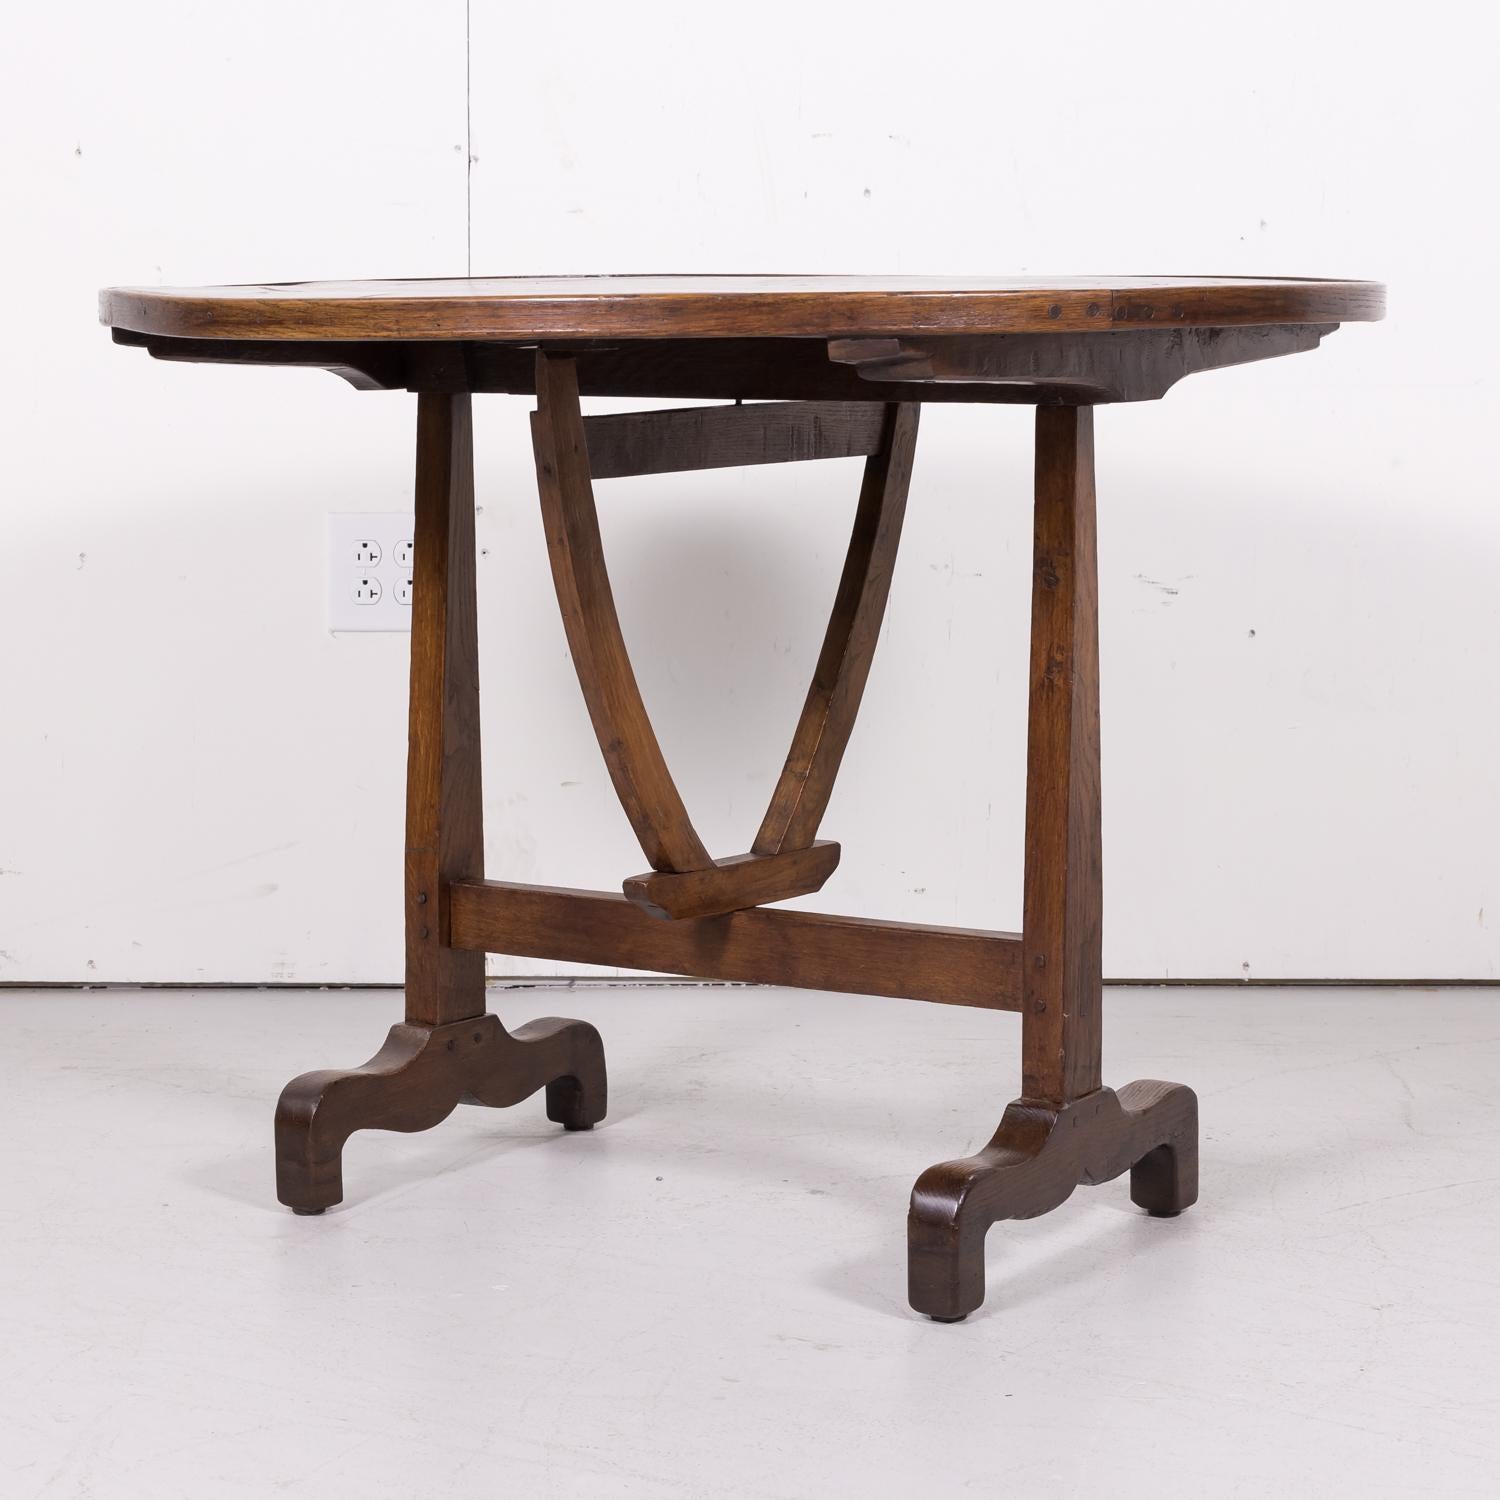 Rare 19th Century French Charles X Period Tilt-Top Wine Tasting or Vendage Table 1